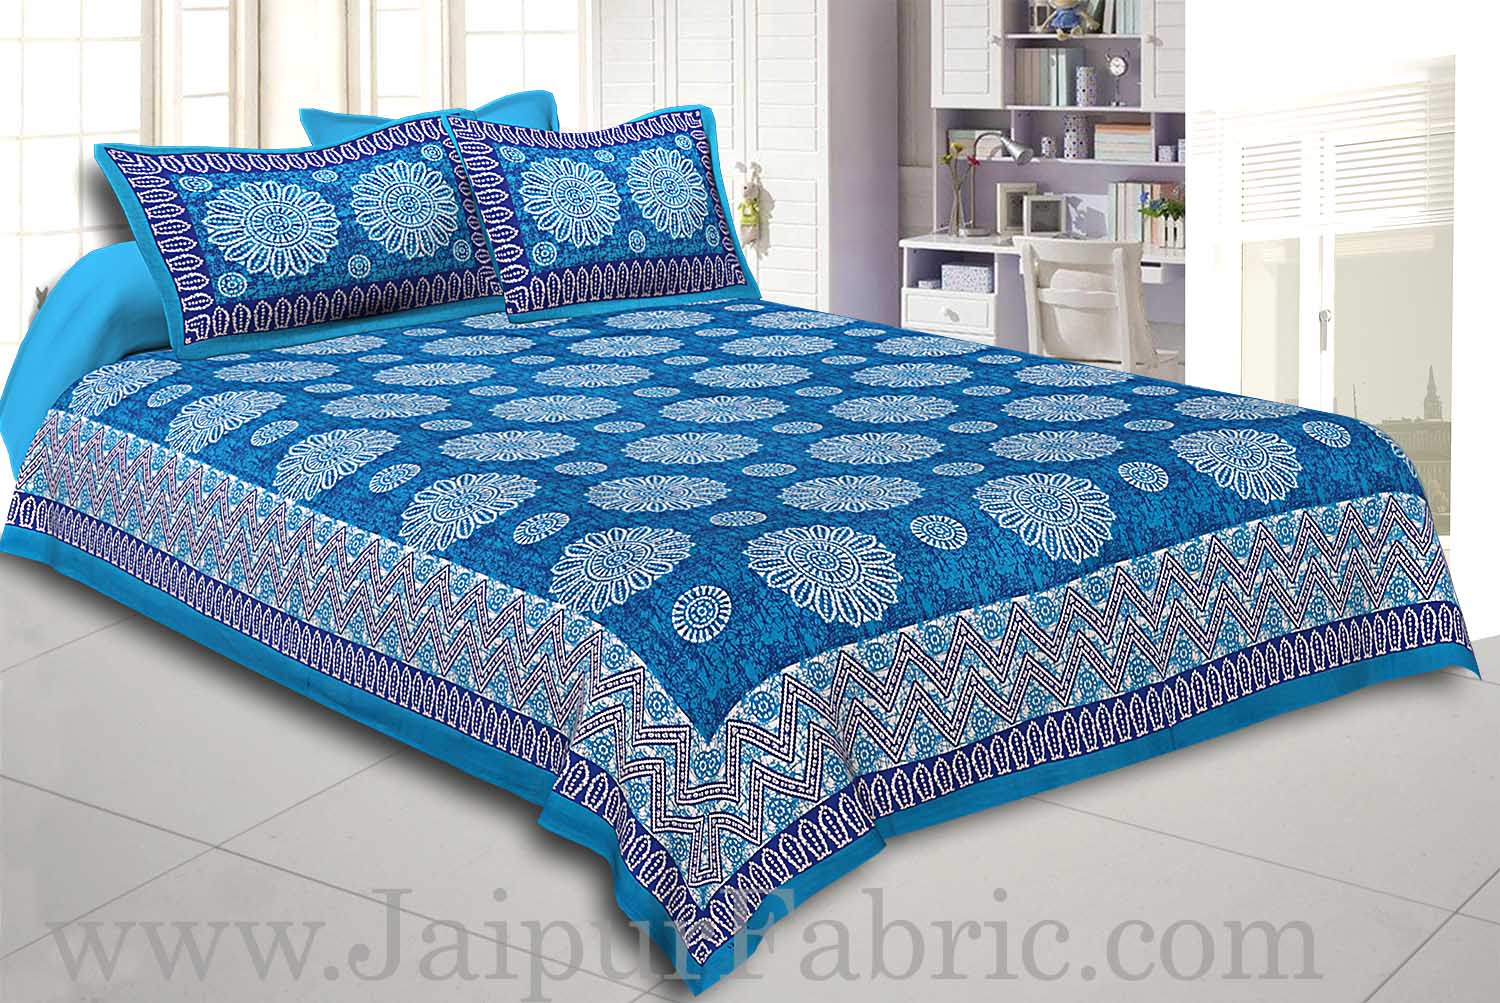 COMBO102 Beautiful Multicolor 4 Bedsheet + 8 Pillow Cover